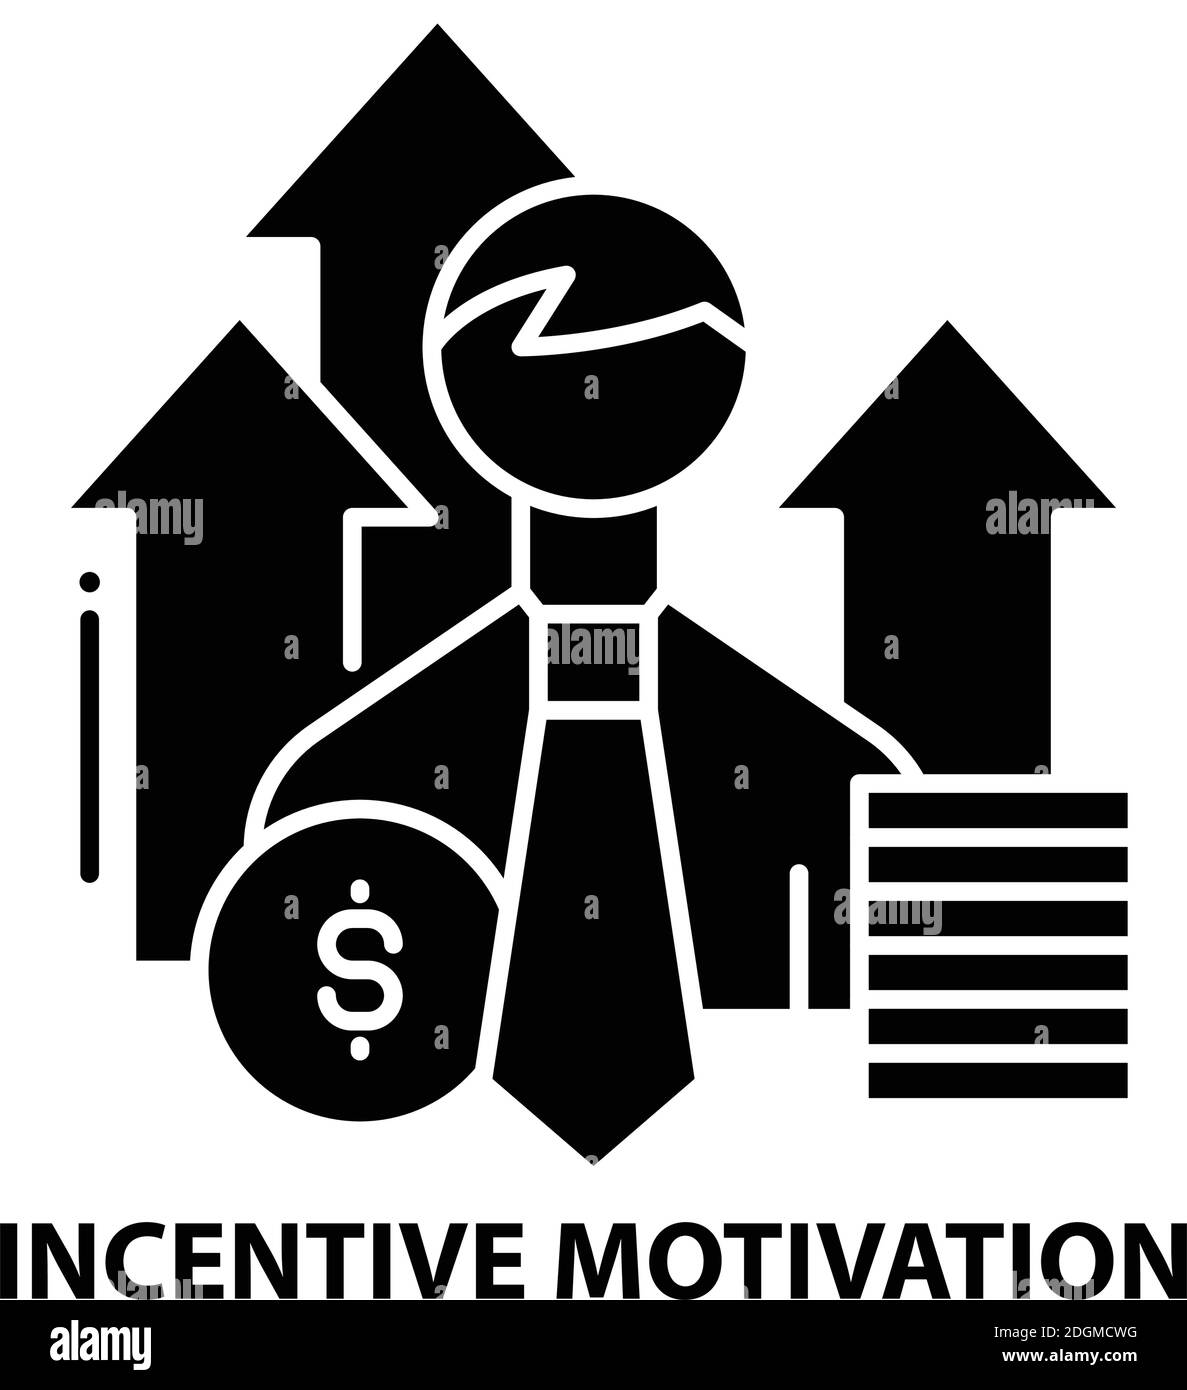 incentive motivation icon, black vector sign with editable strokes, concept illustration Stock Vector